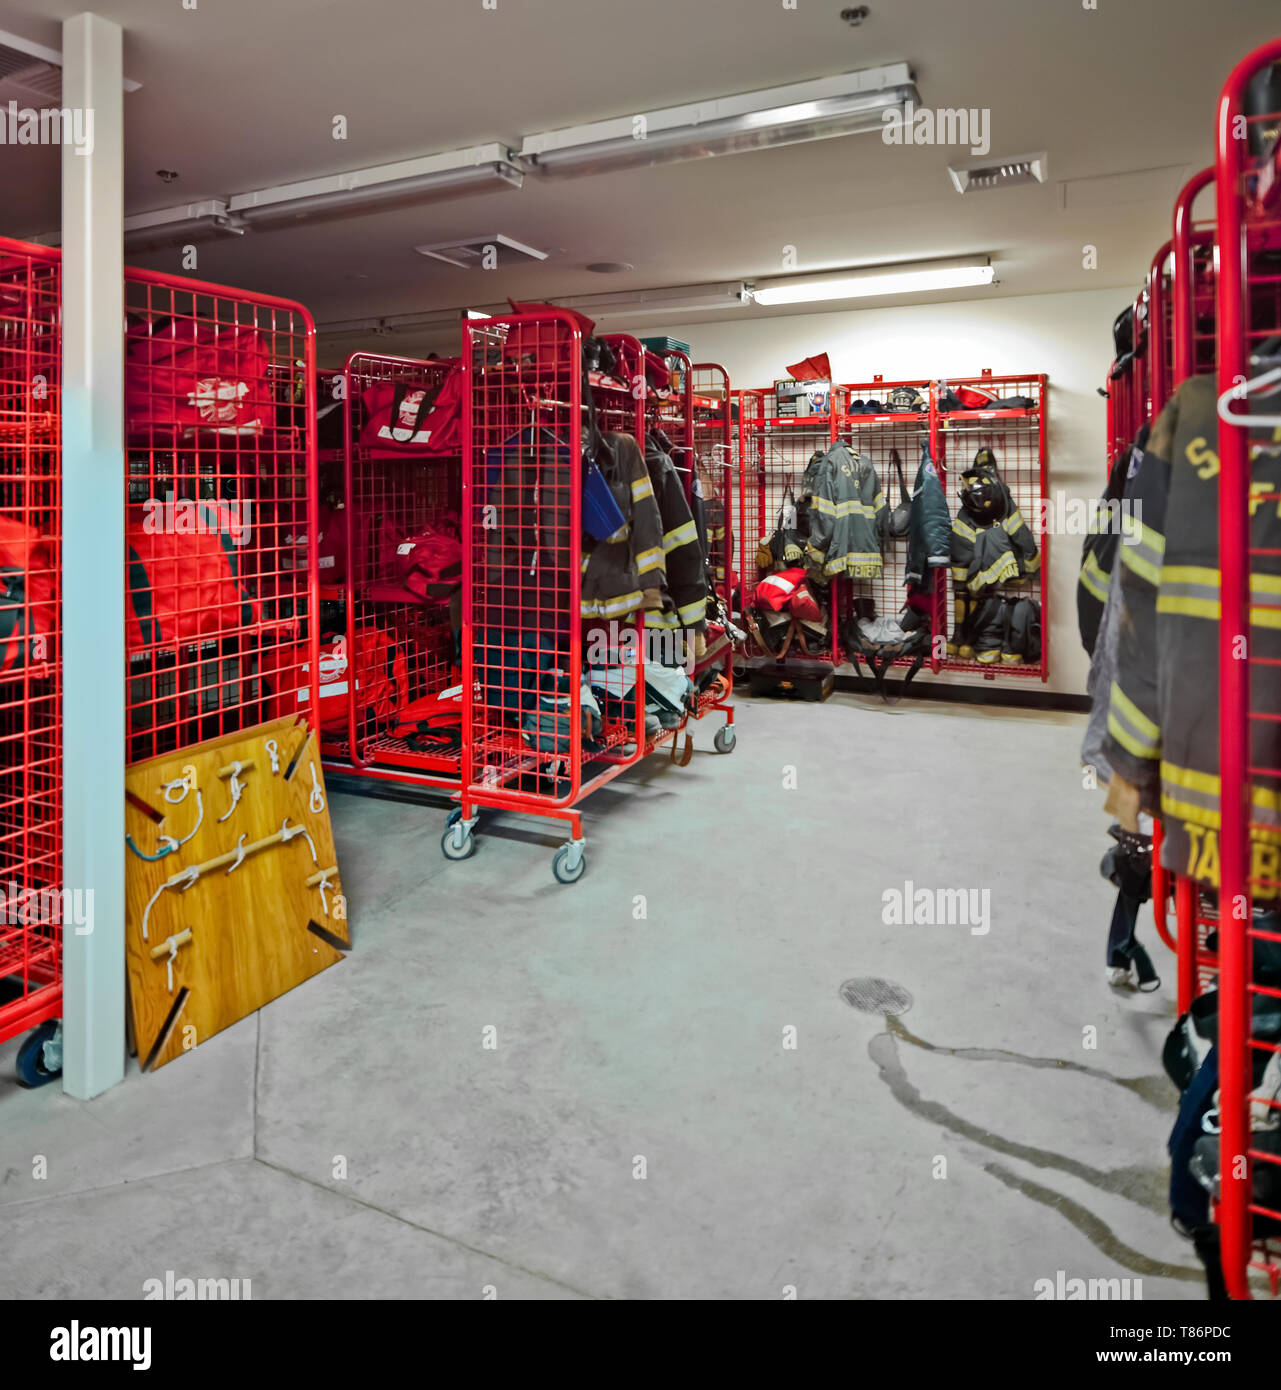 Fire Station Equipment Room Stock Photo